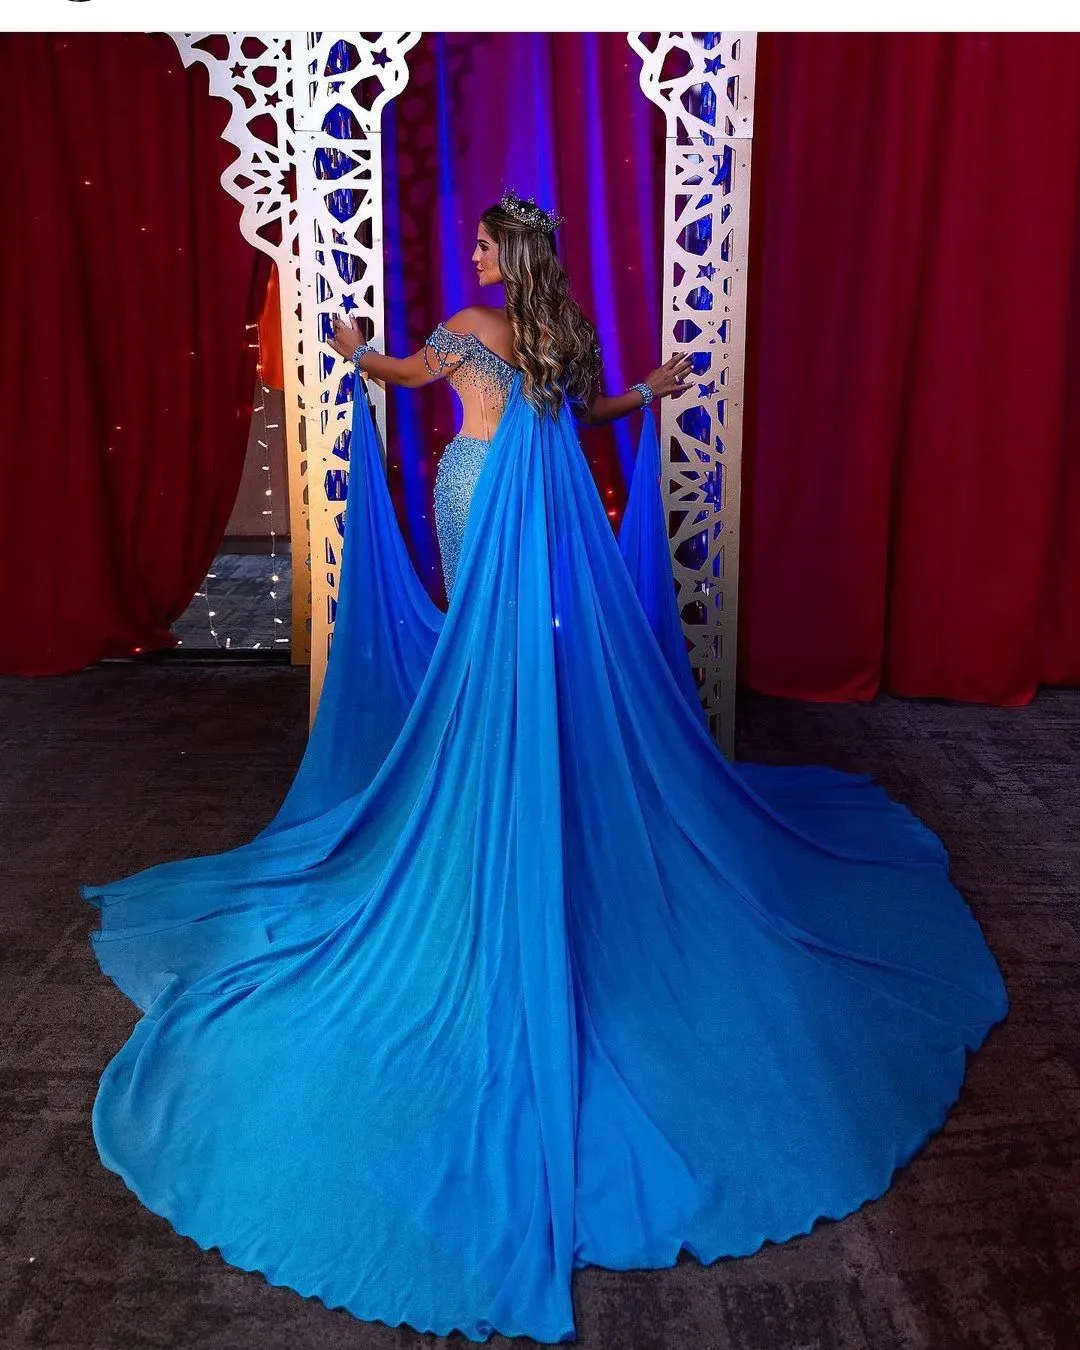 The Most Memorable Pageant Gowns of Miss Universe Winners The Miss Universe beauty  pageant is the one night in the pageantry calendar where we see glamorous evening  gowns parade in front of